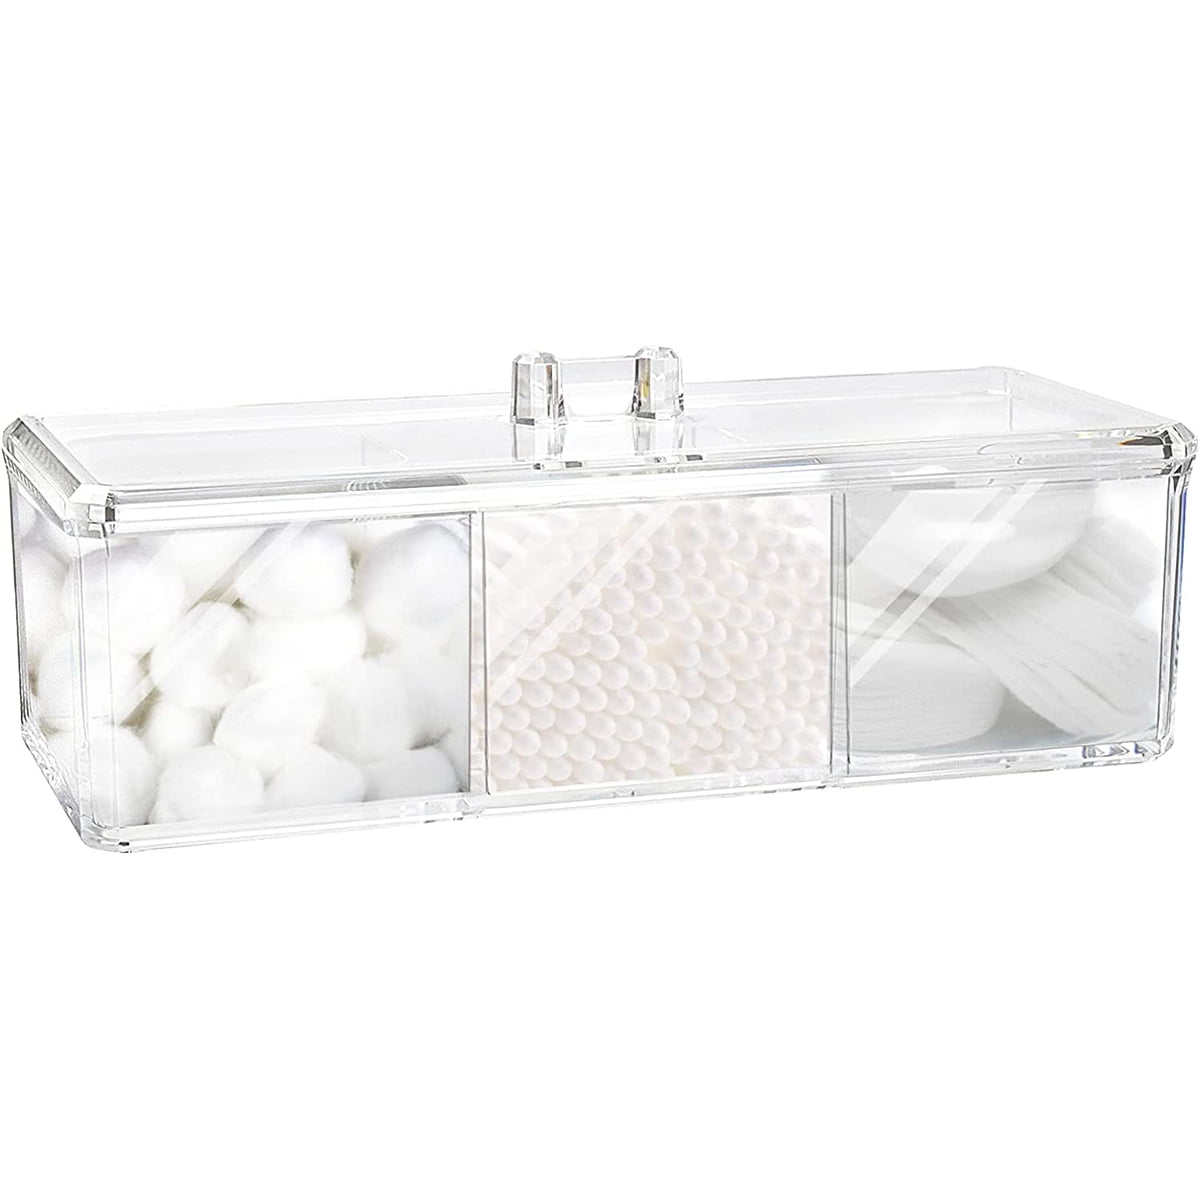 CLEARANCE sale]Wall-mounted Clamshell Storage Box Bathroom Organizers  Storage Self-Adhesive Easy to Install White Cotton Swab Holder Cotton Ball  Cotton Pad Dispenser 